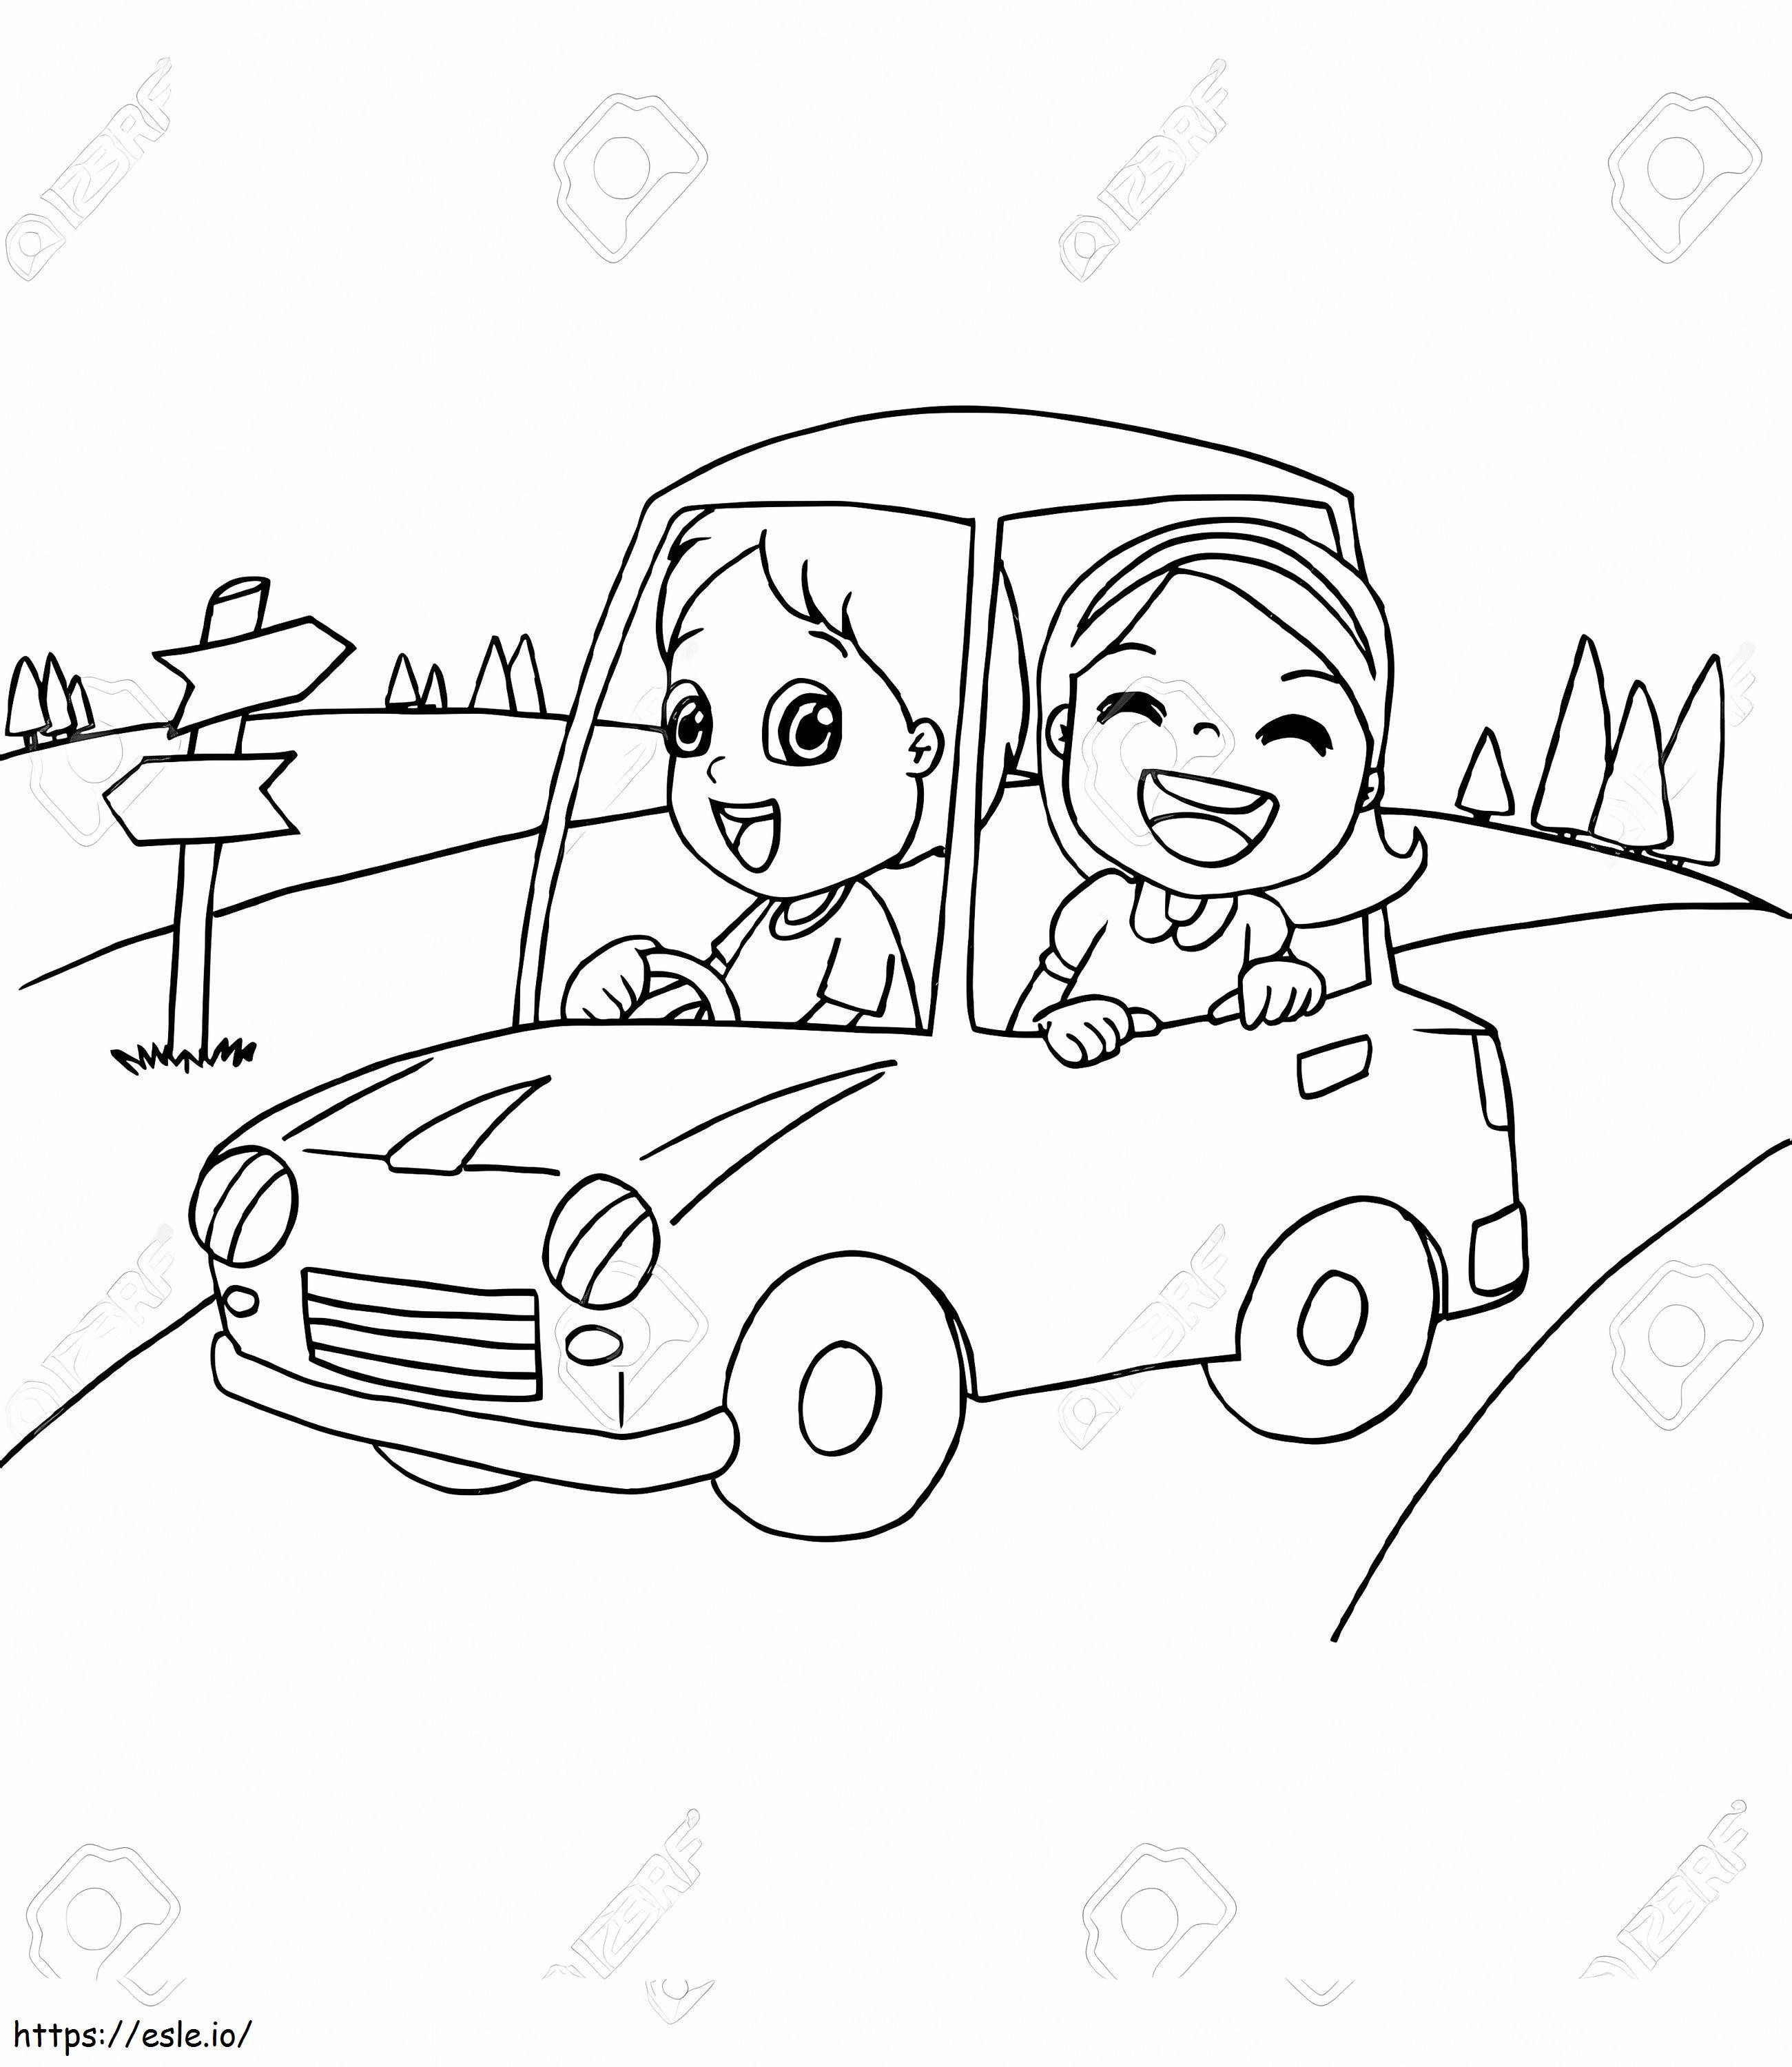 83072559 Image Of Little Boy And Friend Driving A Toy Car Vector coloring page